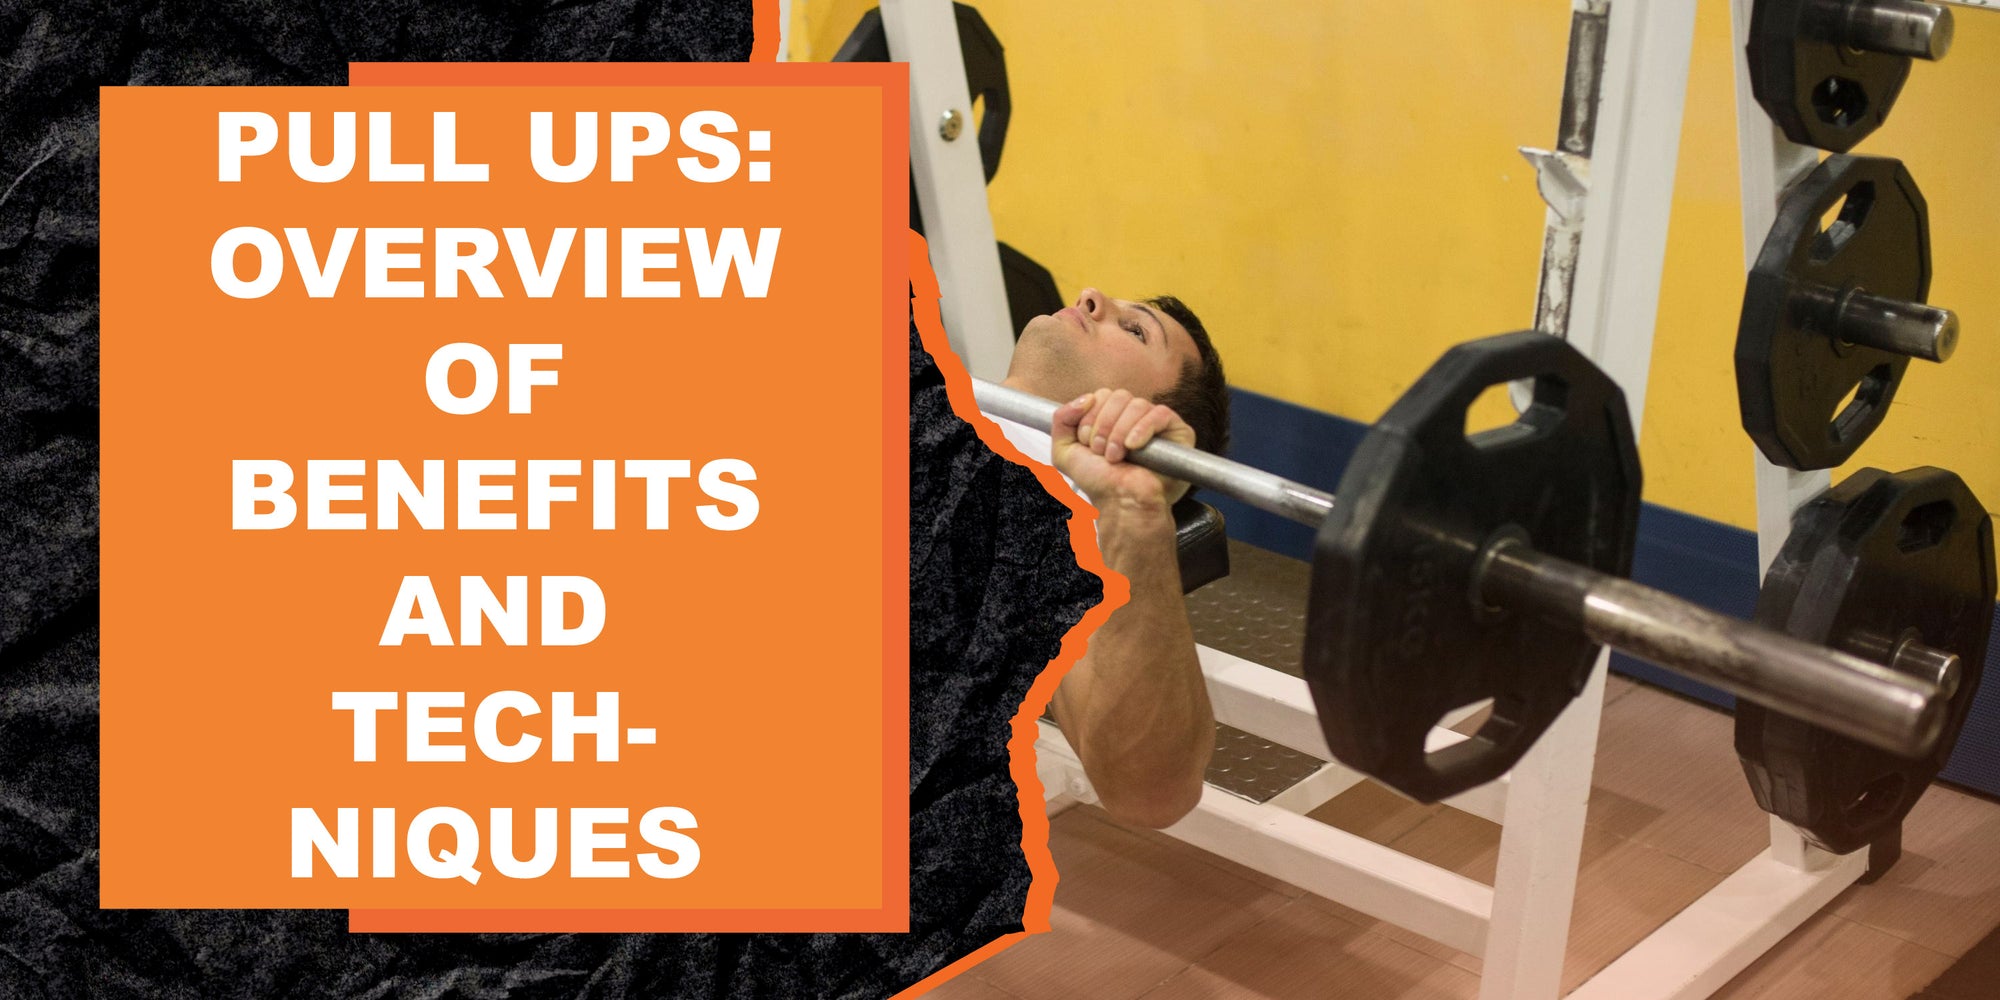 Pull Ups: Overview of Benefits and Techniques